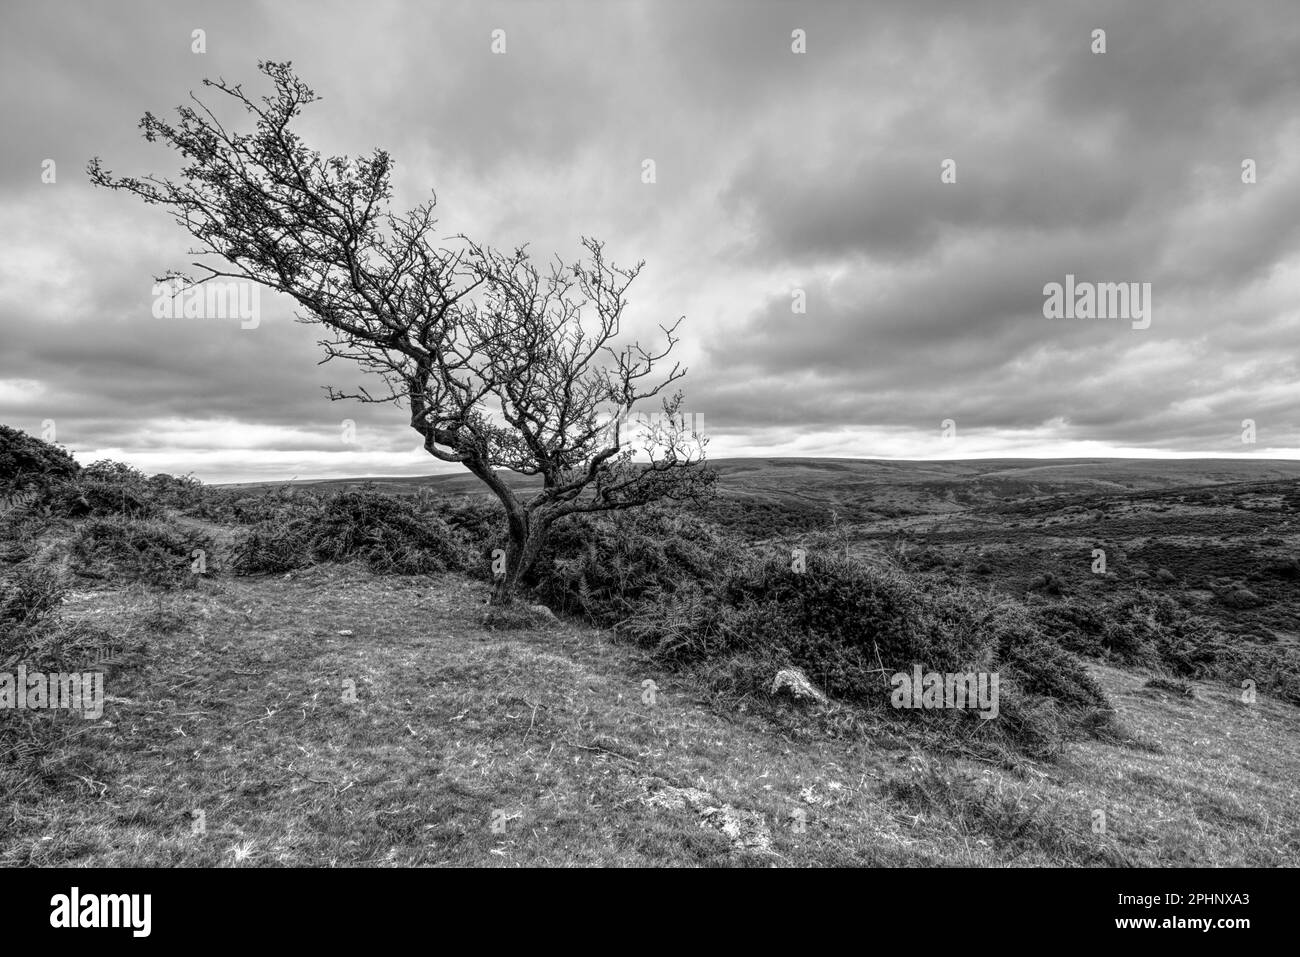 A lone, barren tree standing atop a grassy hill, surrounded by rolling hills in the vast landscape Stock Photo